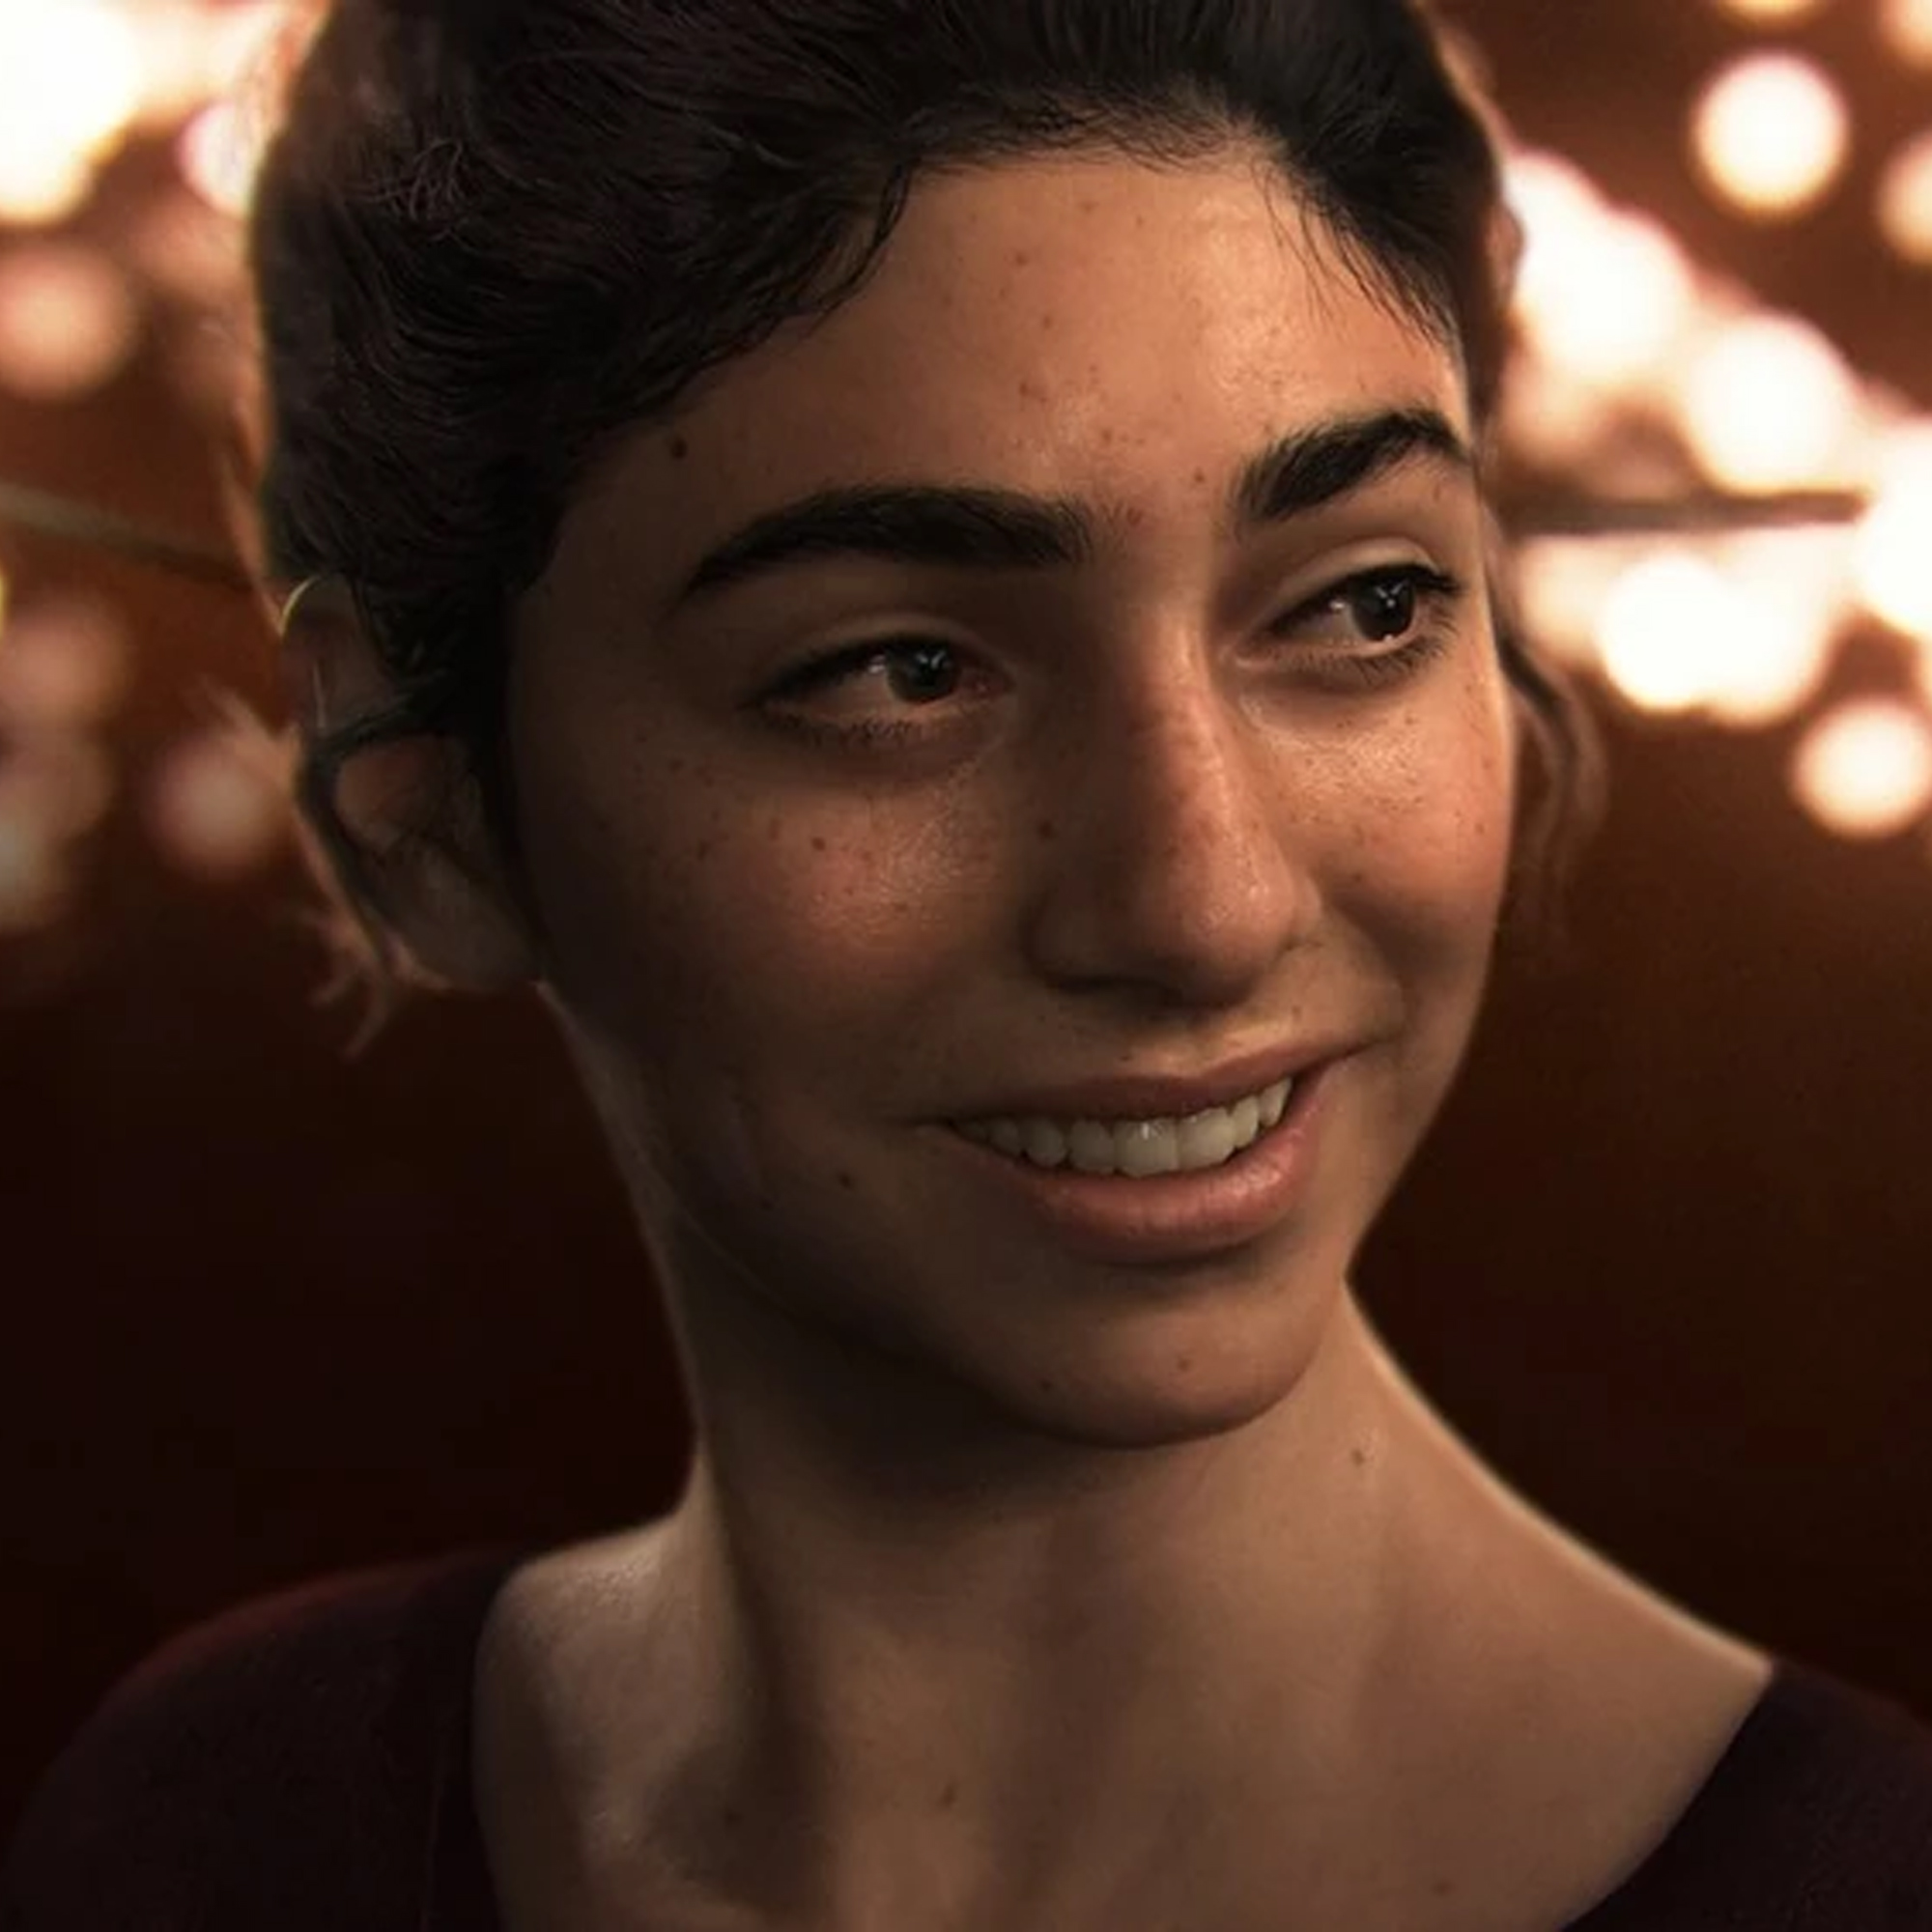 Dina in The Last of Us Part 2.